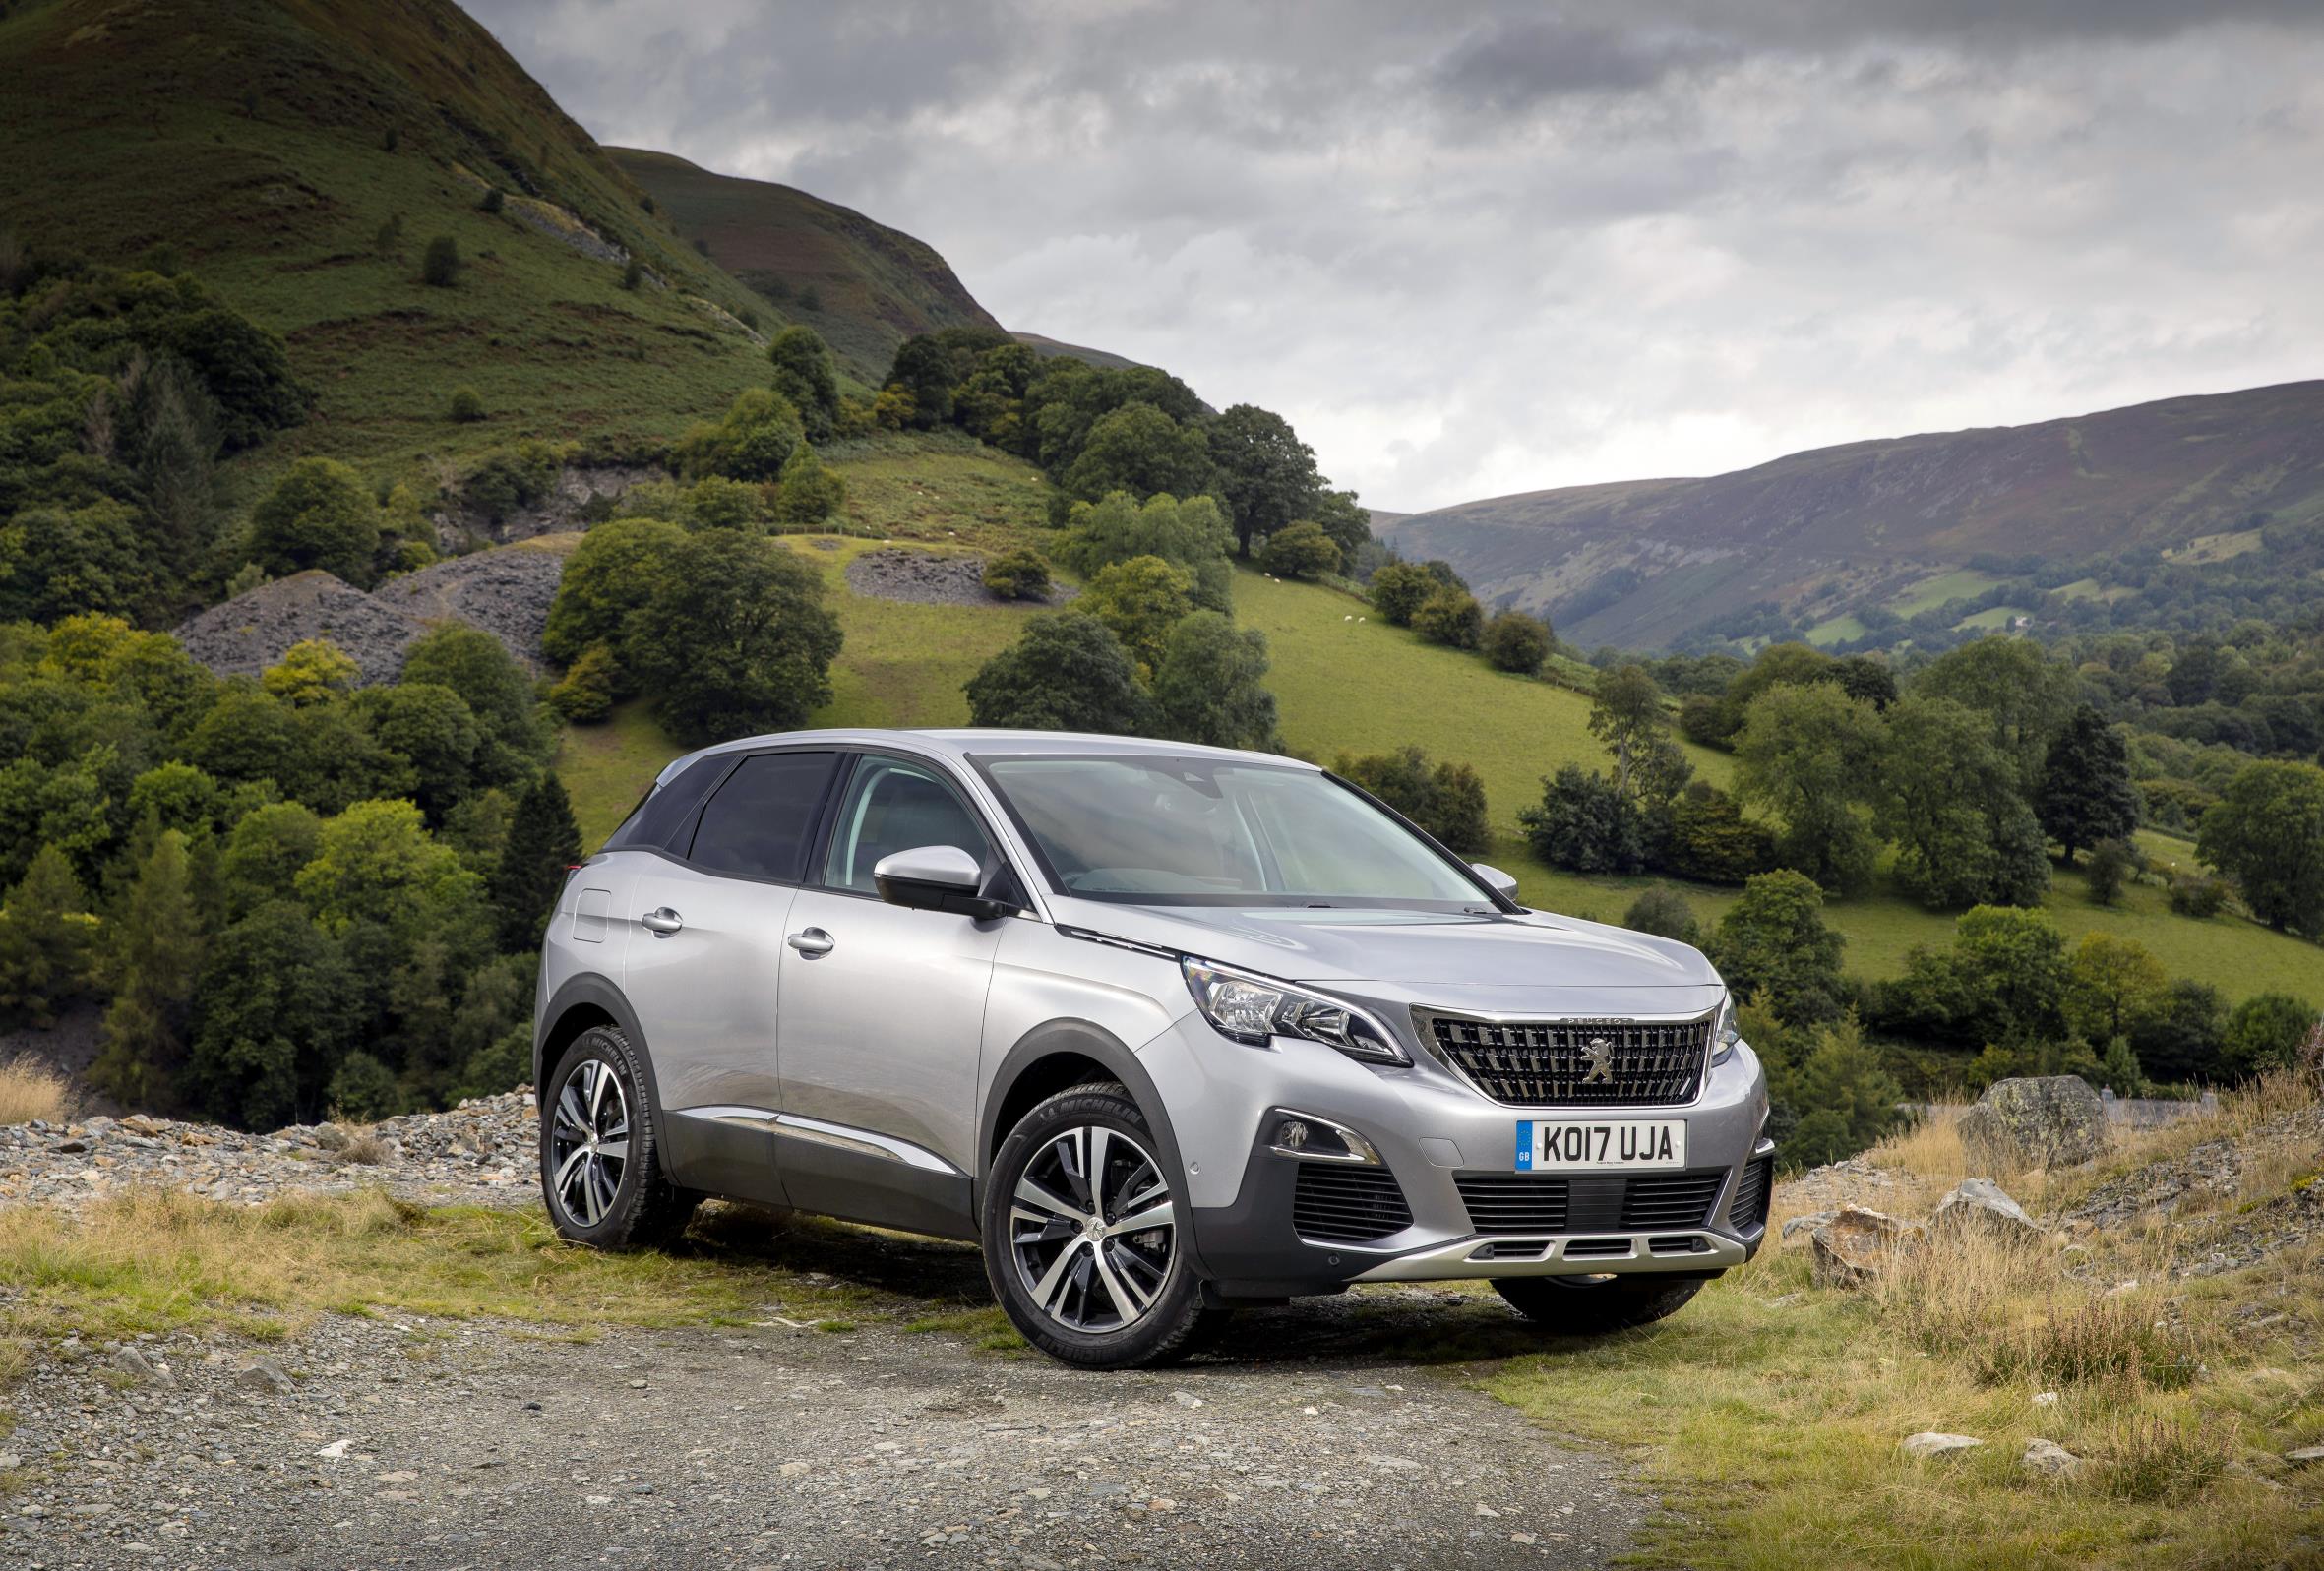 SIlver Peugeot 3008 SUV parked with a dramatic backdrop